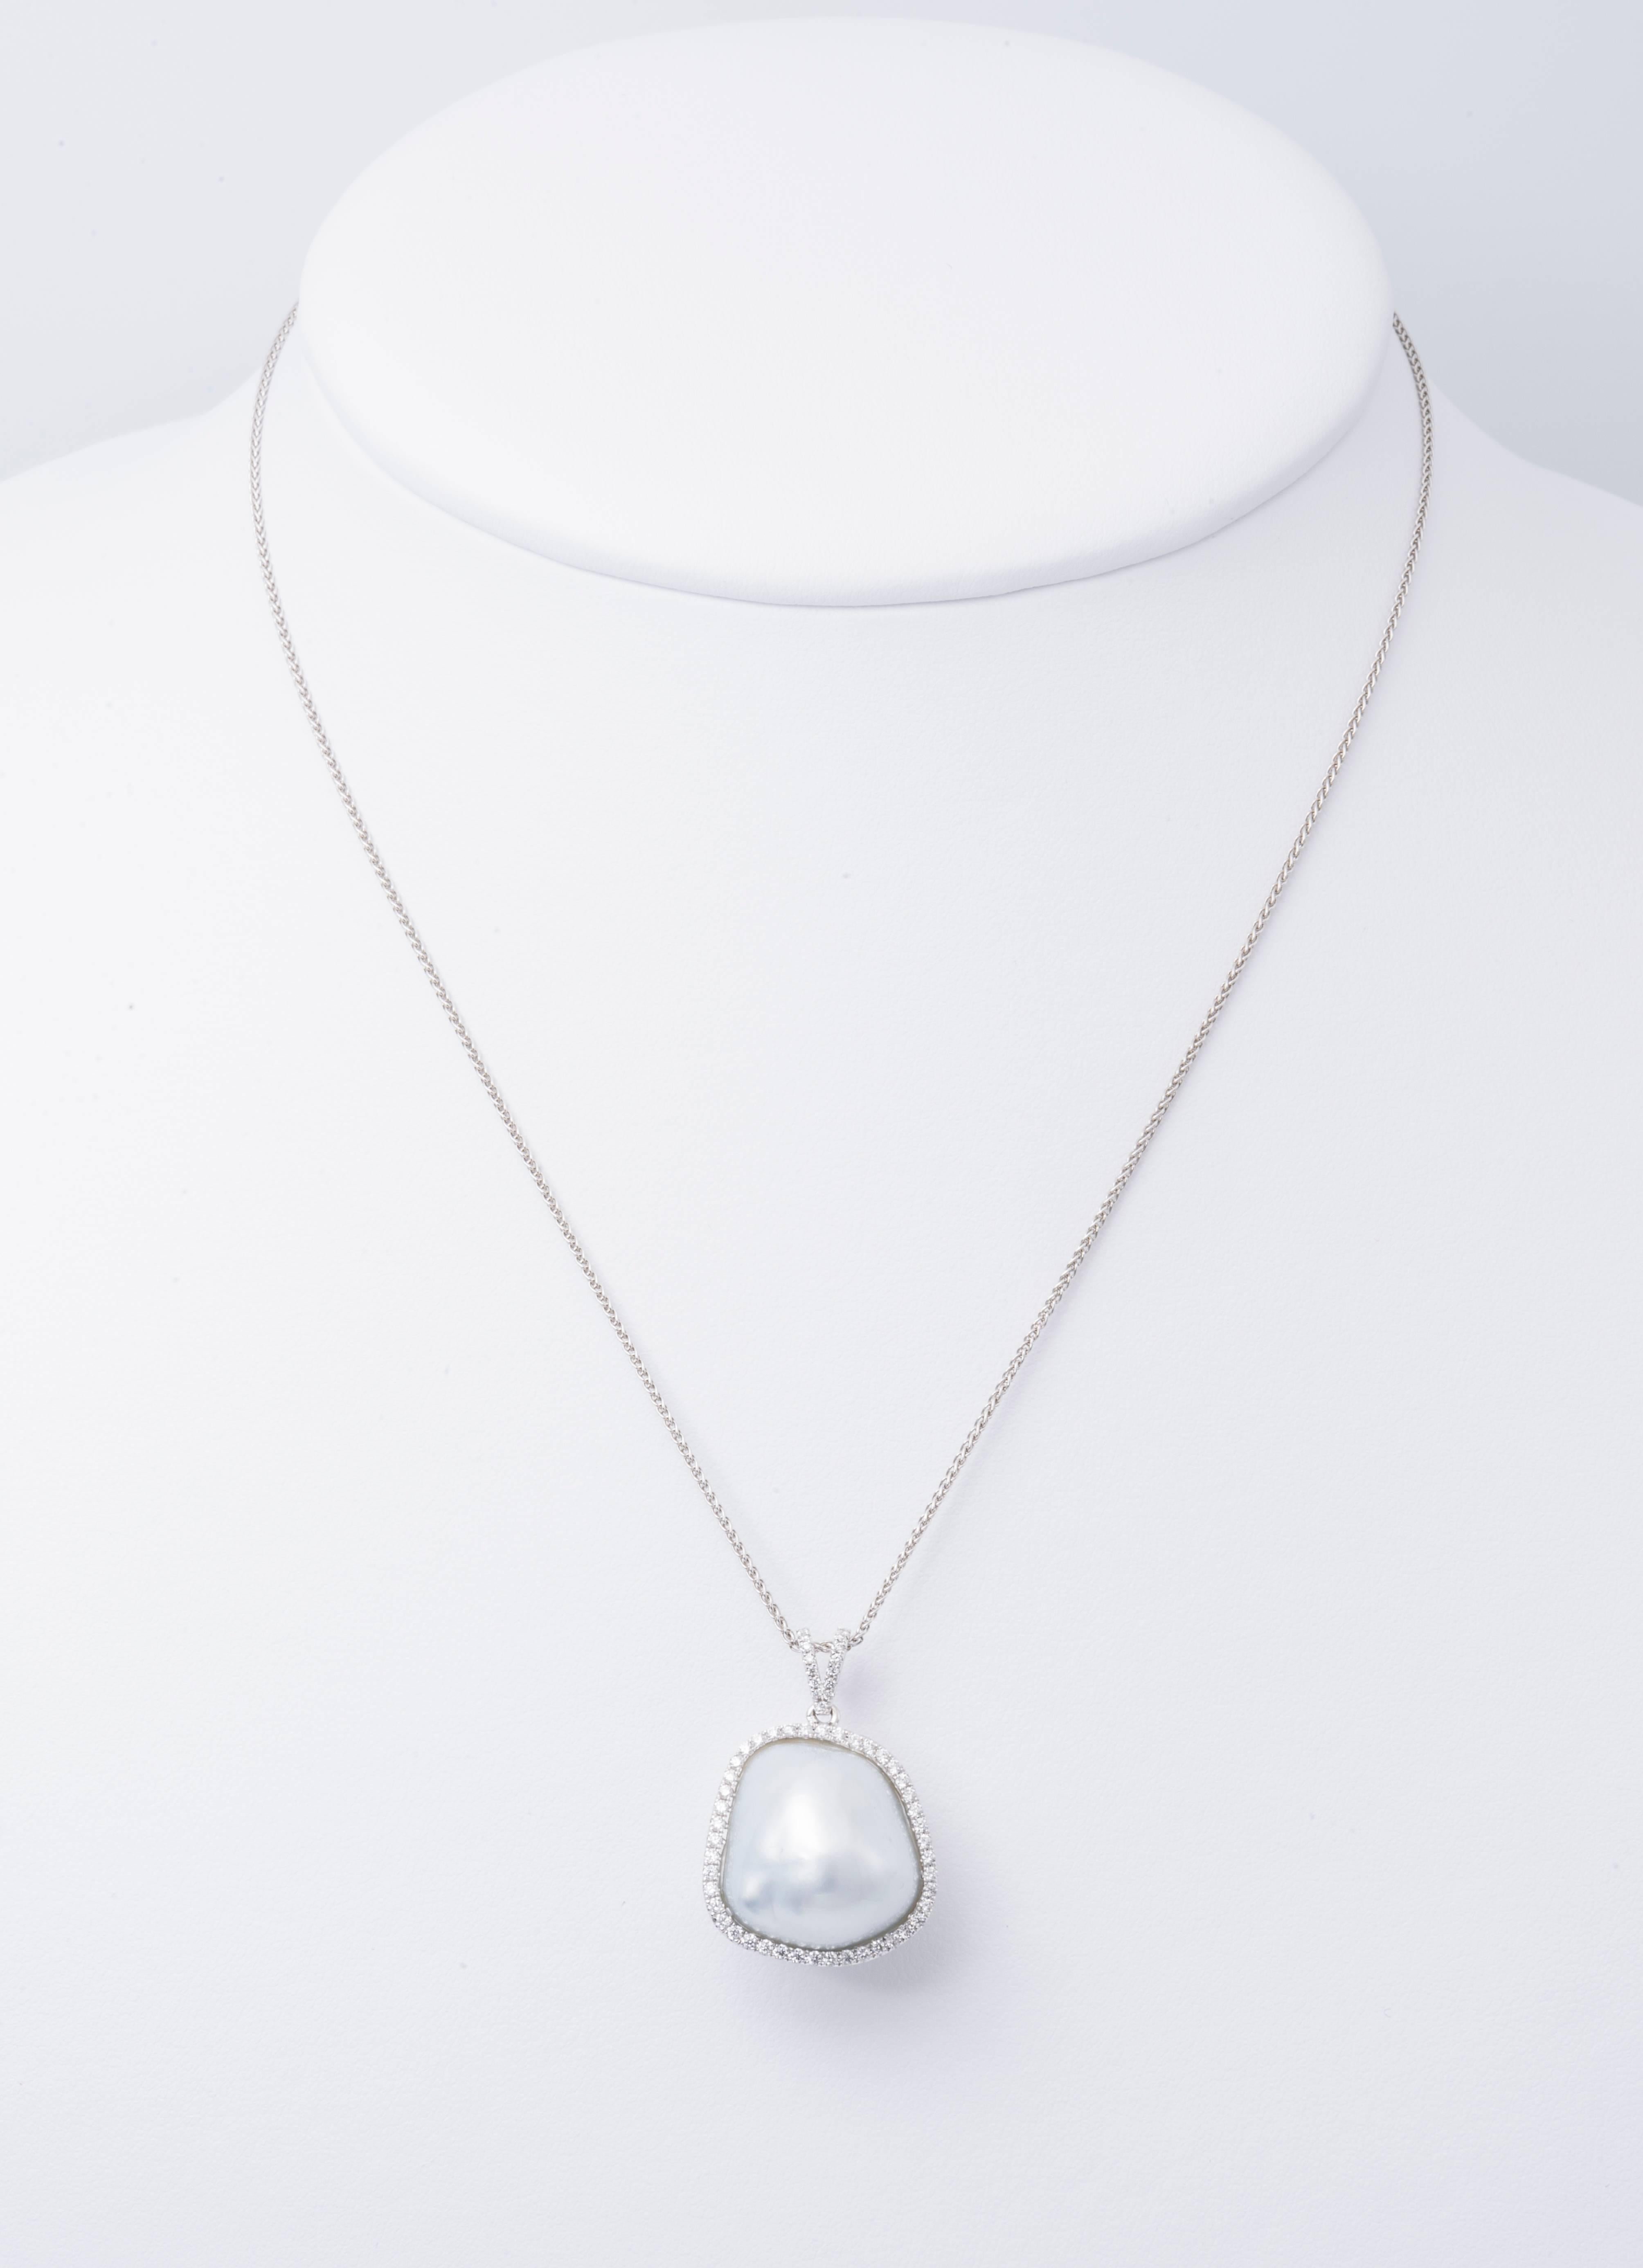 18 Karat white gold South Sea baroque pendant:
Diamonds : 0.31 Cts.
2.7 g.
Pearl: 14-15 mm white with silver overtone
Each pearl has a different shape so not necessarily the pearl will be in the same shape as the one shown in the picture